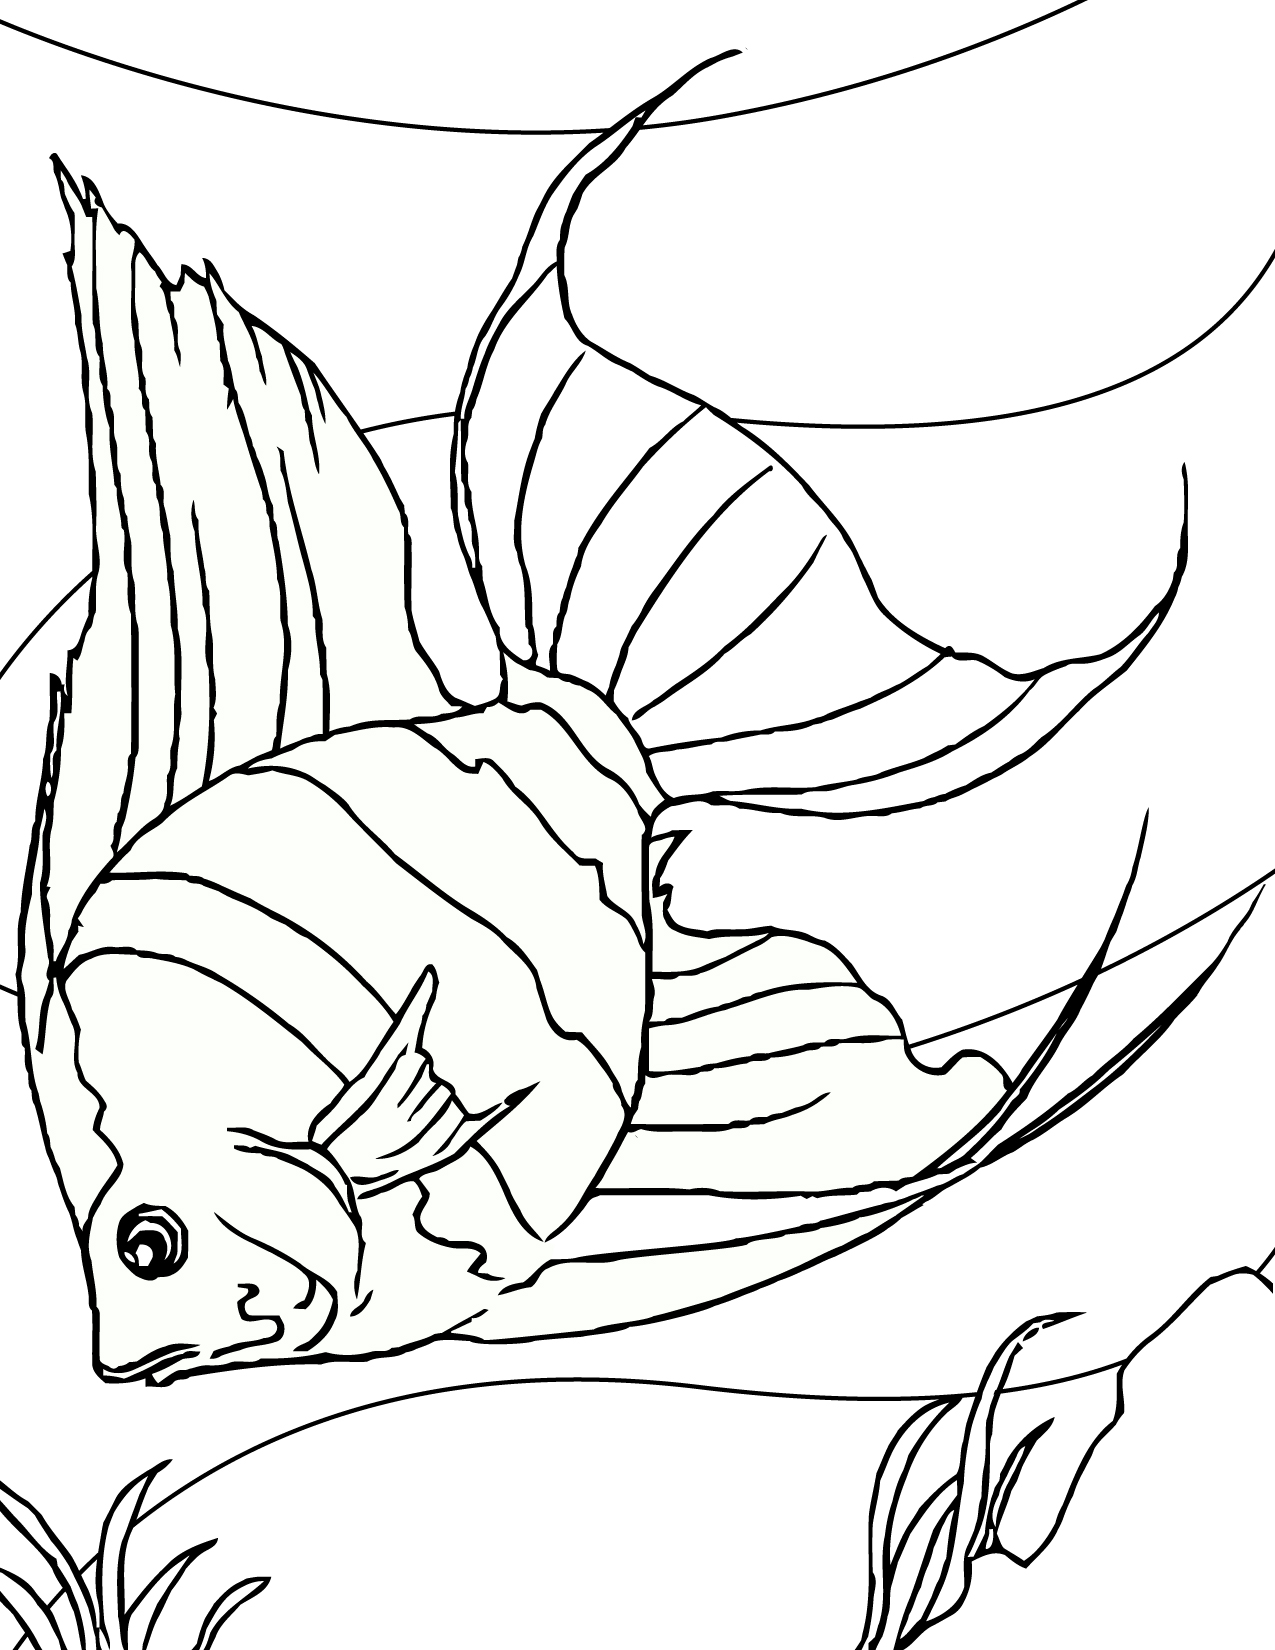 Free Printable Fish Coloring Pages For Kids Effy Moom Free Coloring Picture wallpaper give a chance to color on the wall without getting in trouble! Fill the walls of your home or office with stress-relieving [effymoom.blogspot.com]